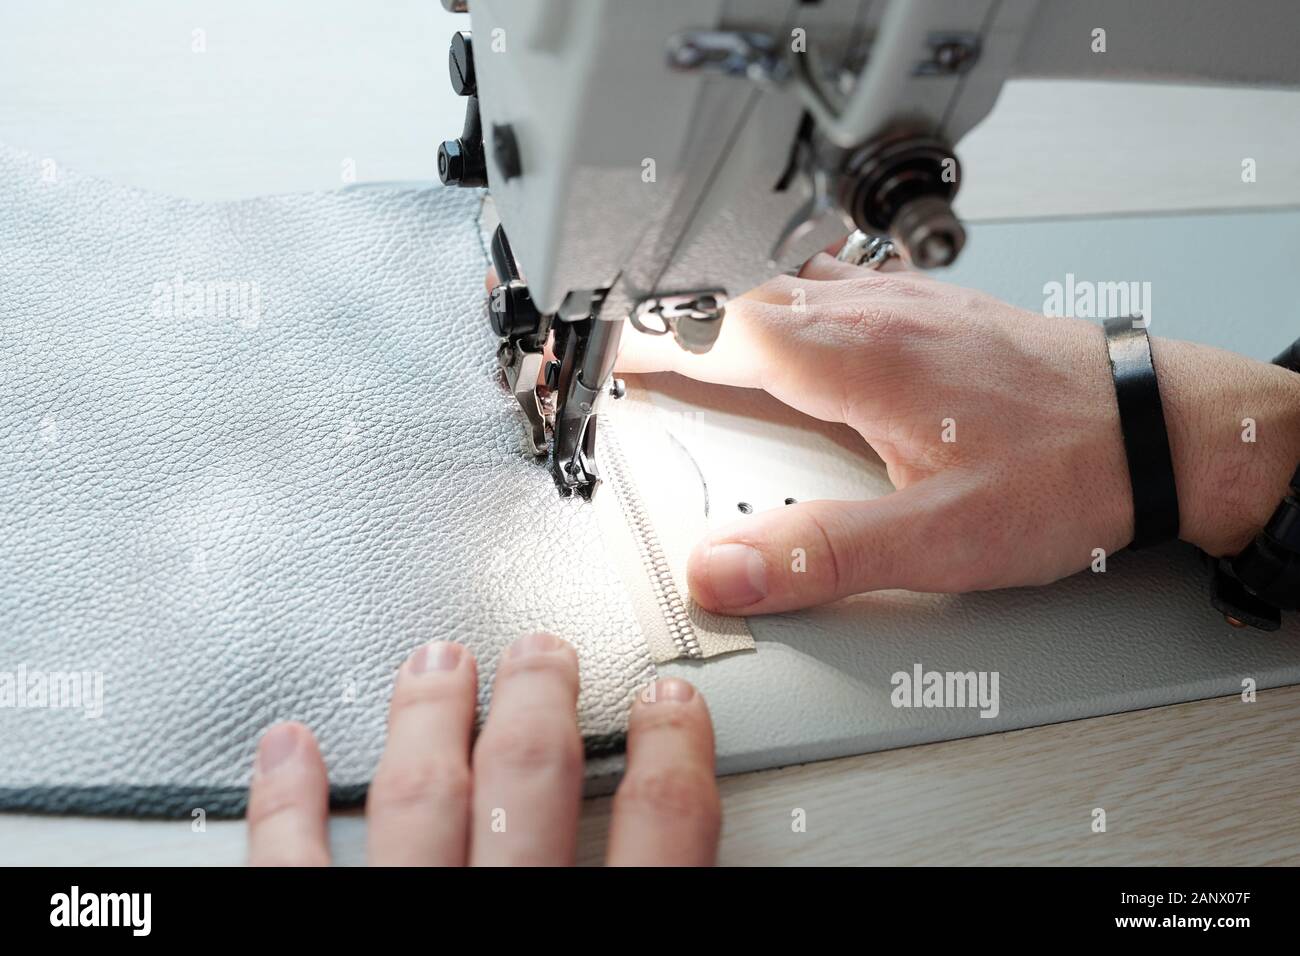 Sewing zipper to leather fabric Stock Photo